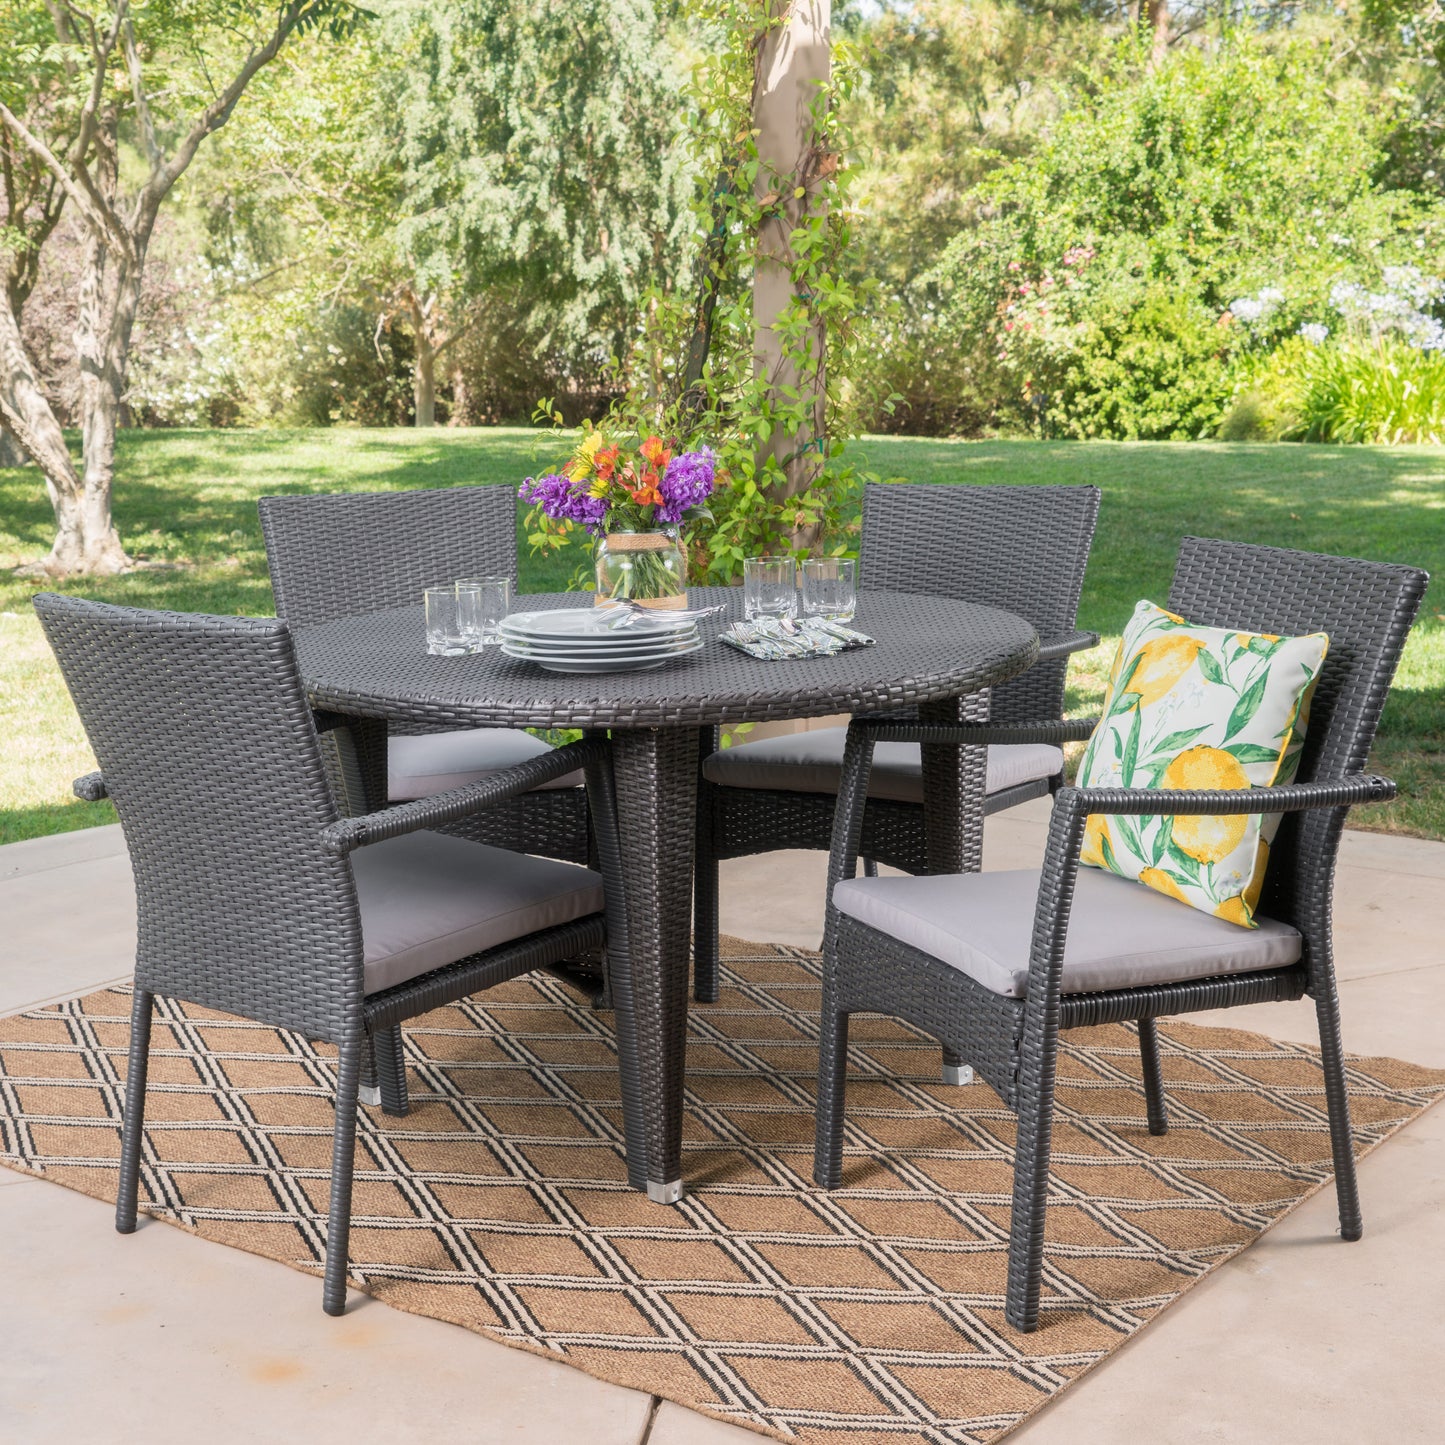 Pelican Outdoor 5 Piece Wicker Circular Dining Set with Water Resistant Cushions